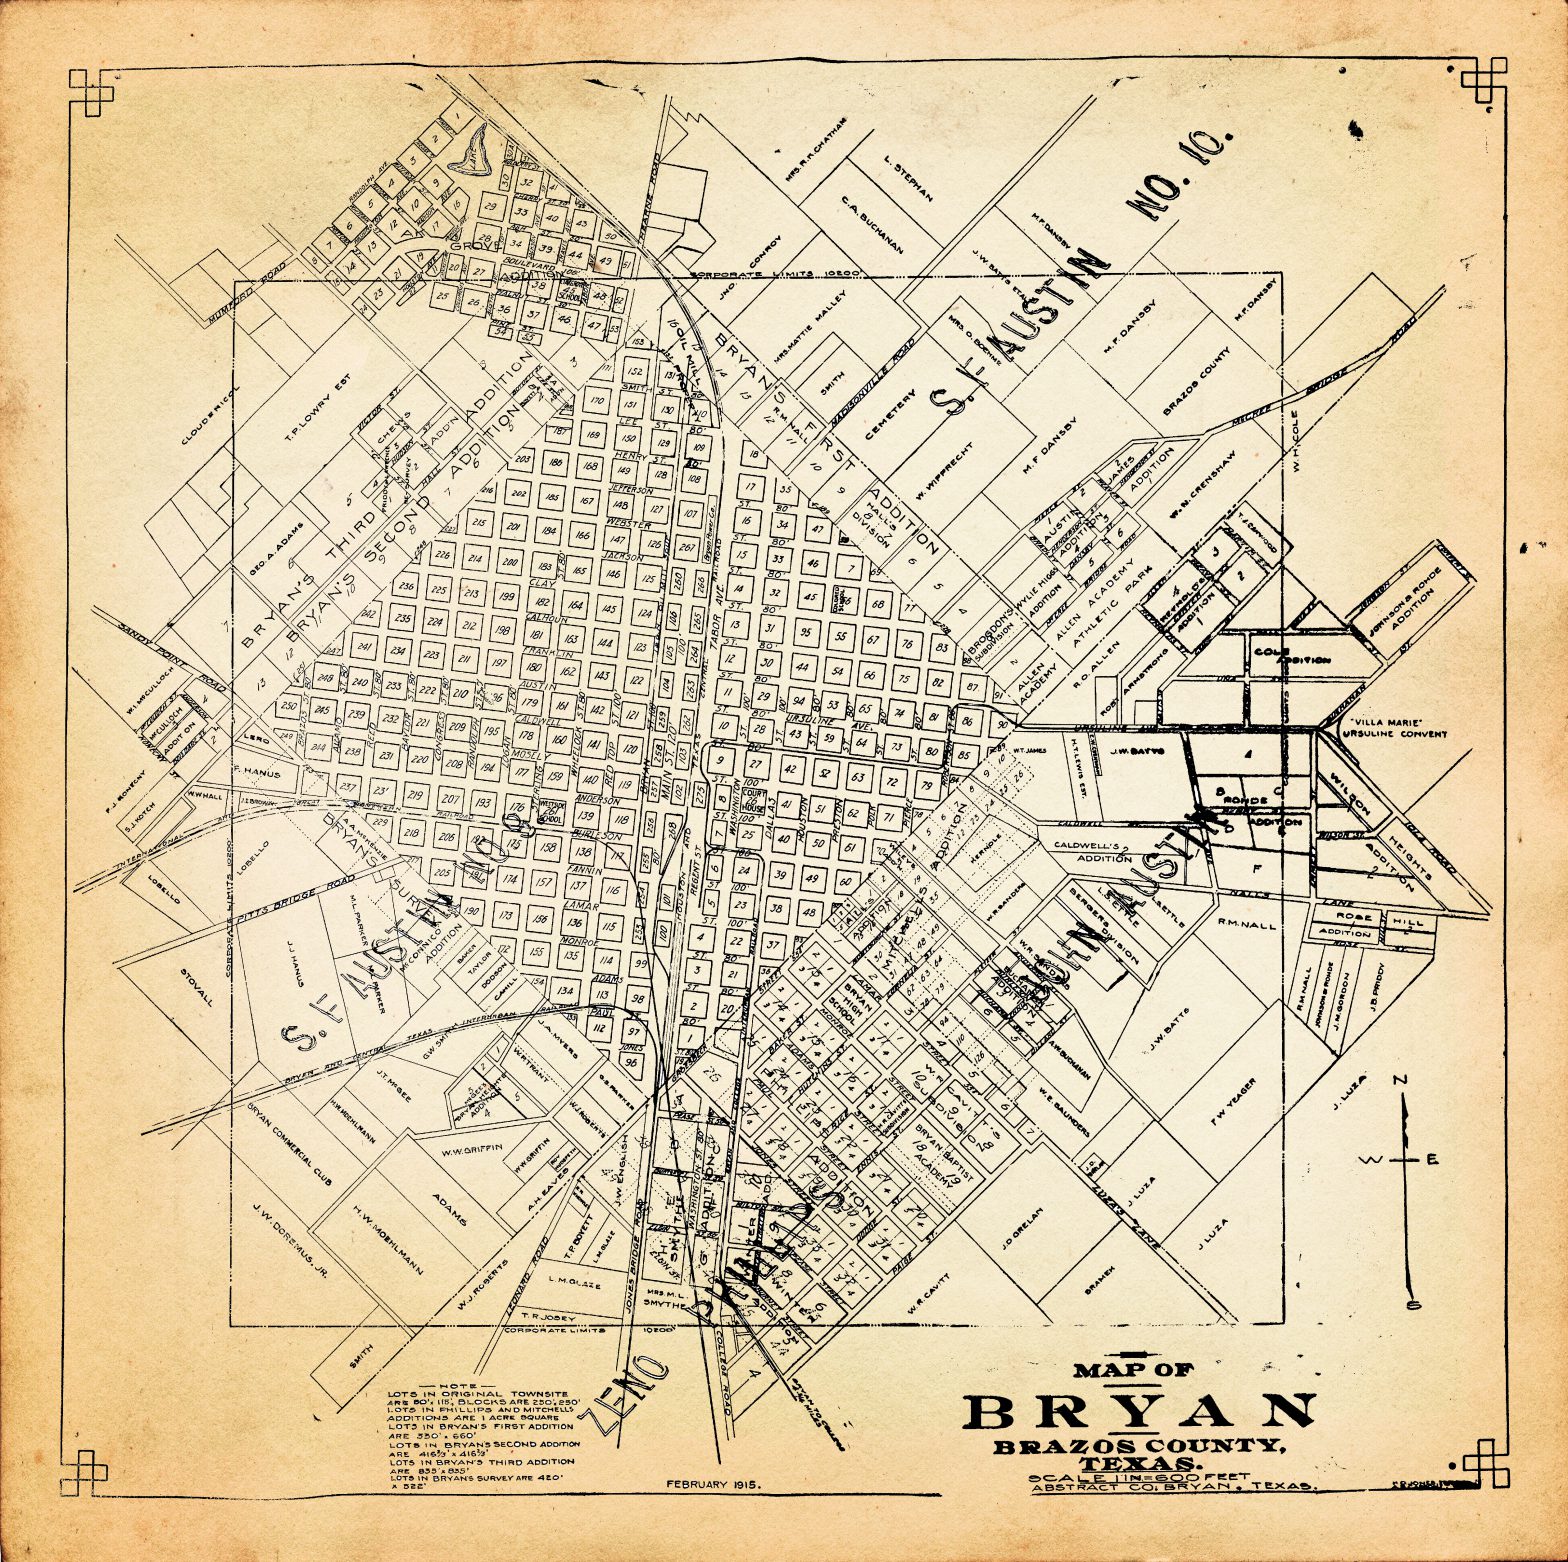 City of Bryan map illustration from 1915. Digital image from City Development services department that has been stylized.